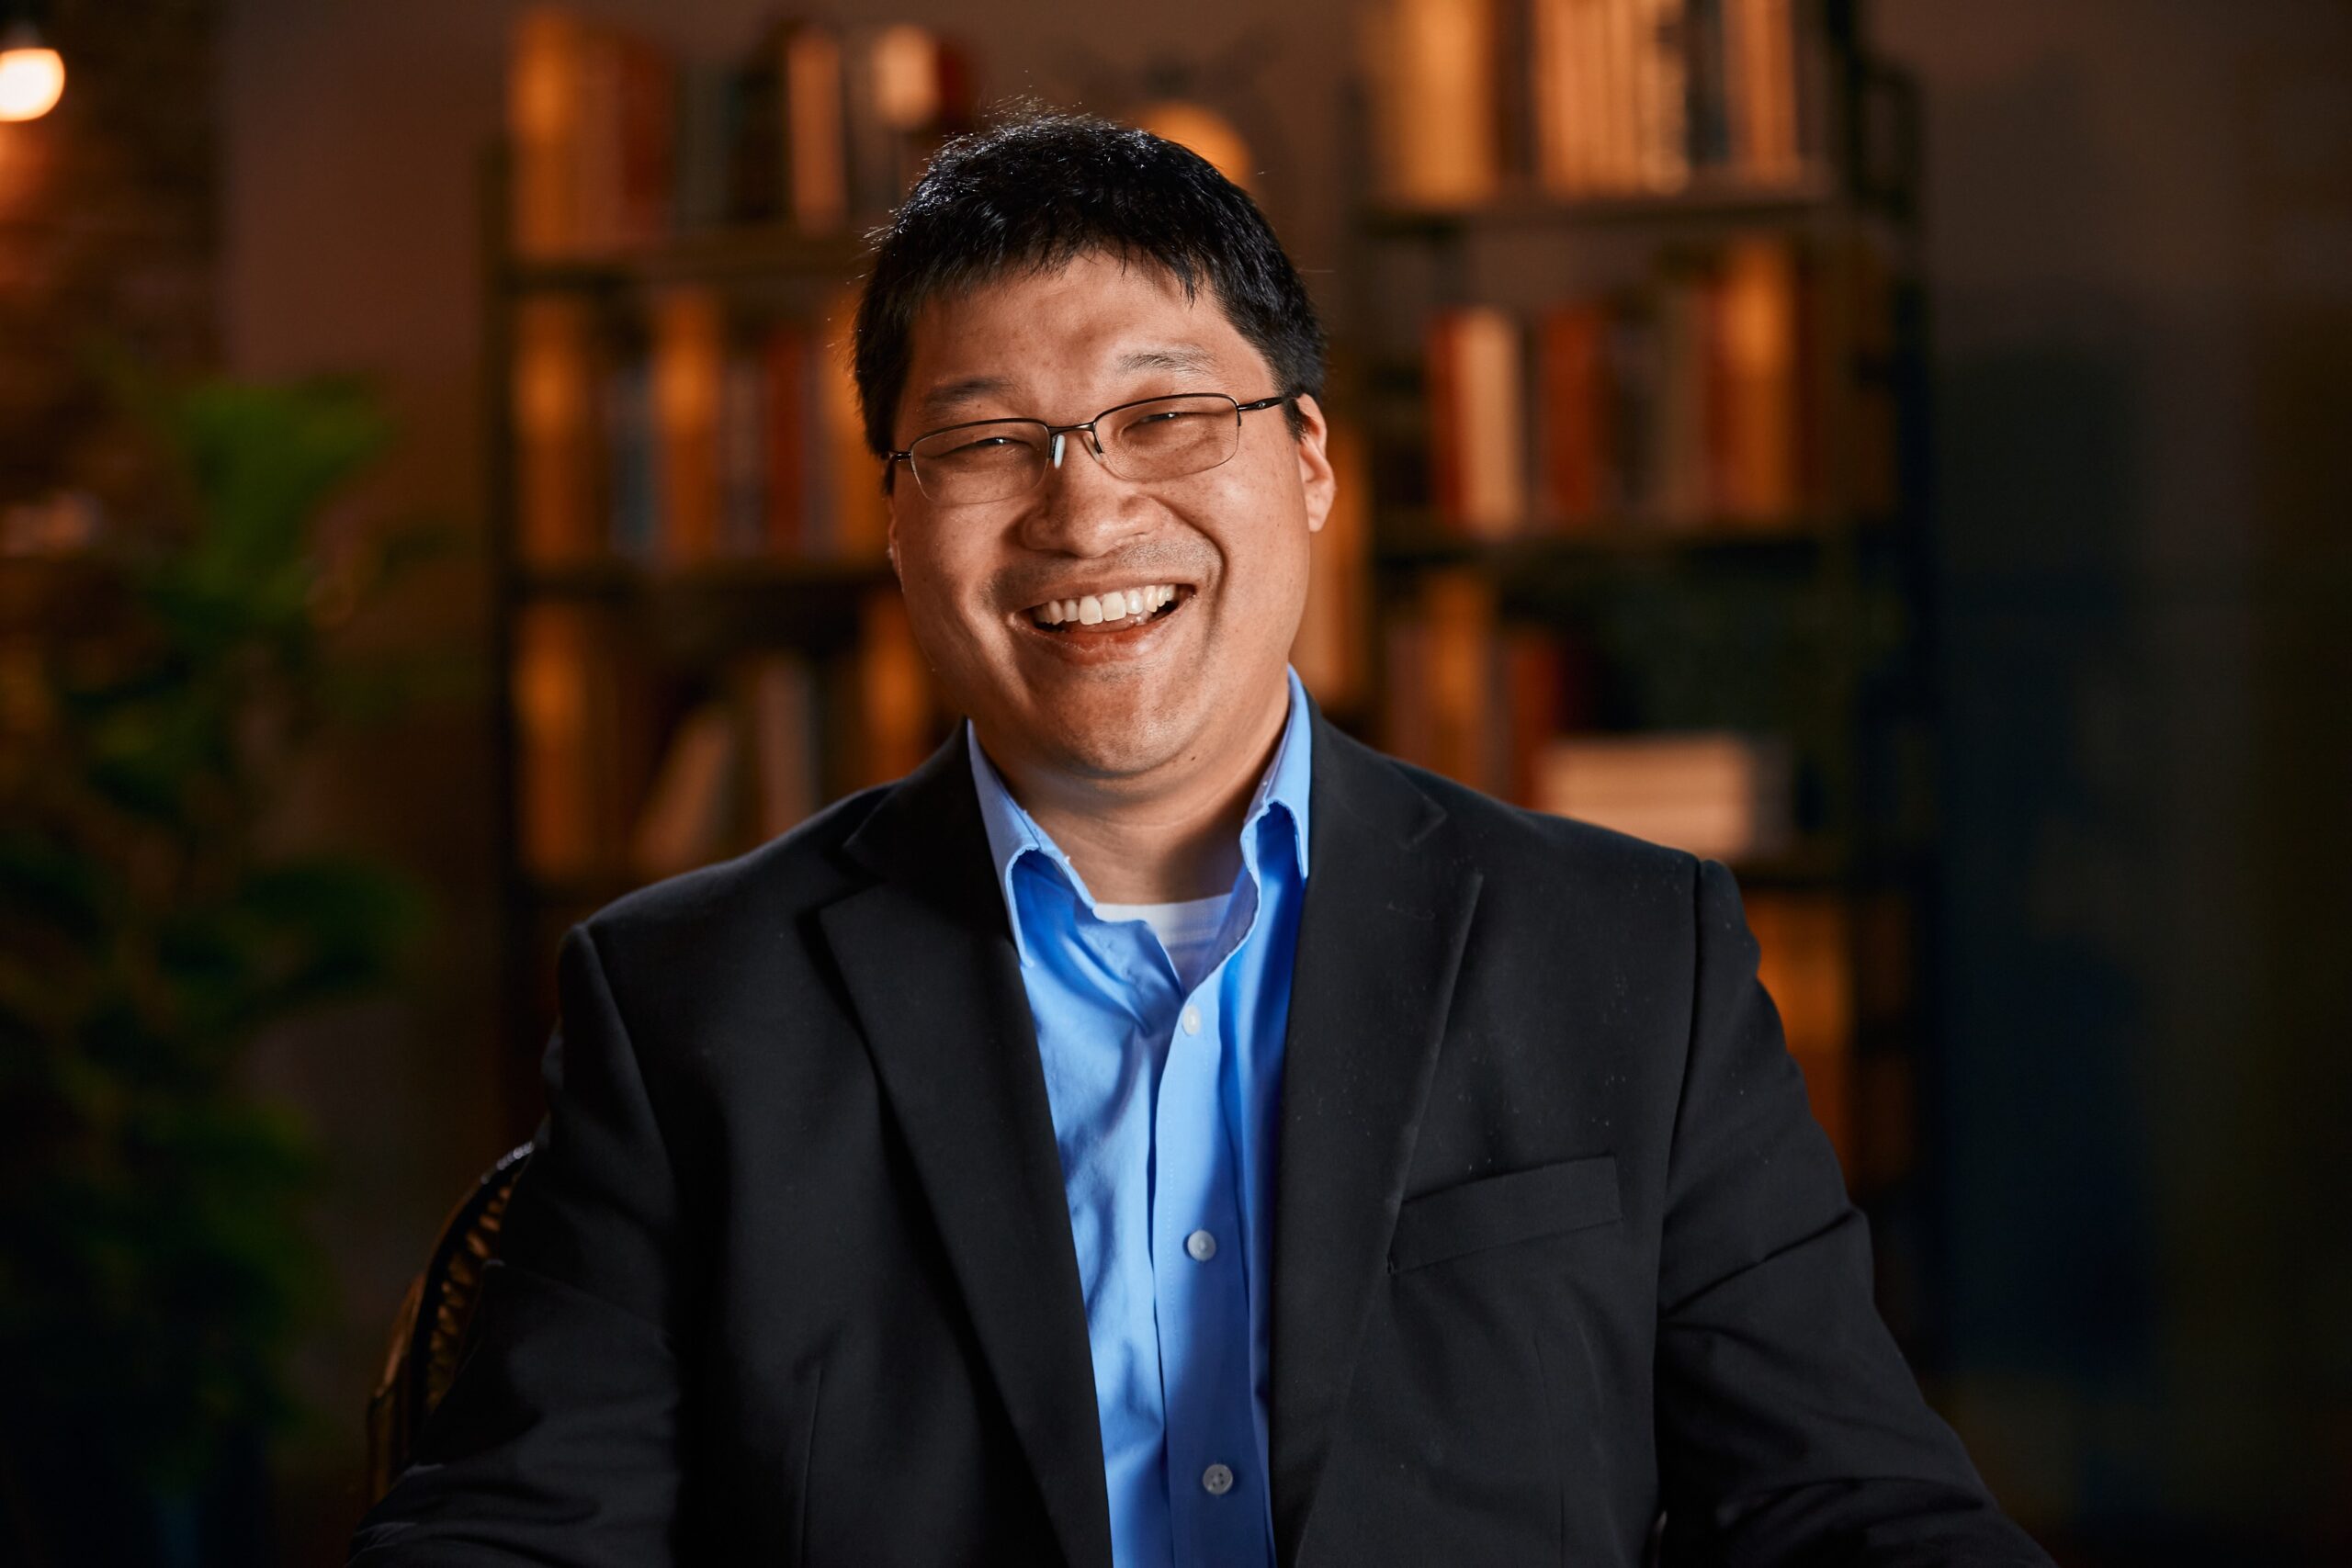 Dr. Abner Chou Addresses Key Theological Truths in New Video Series